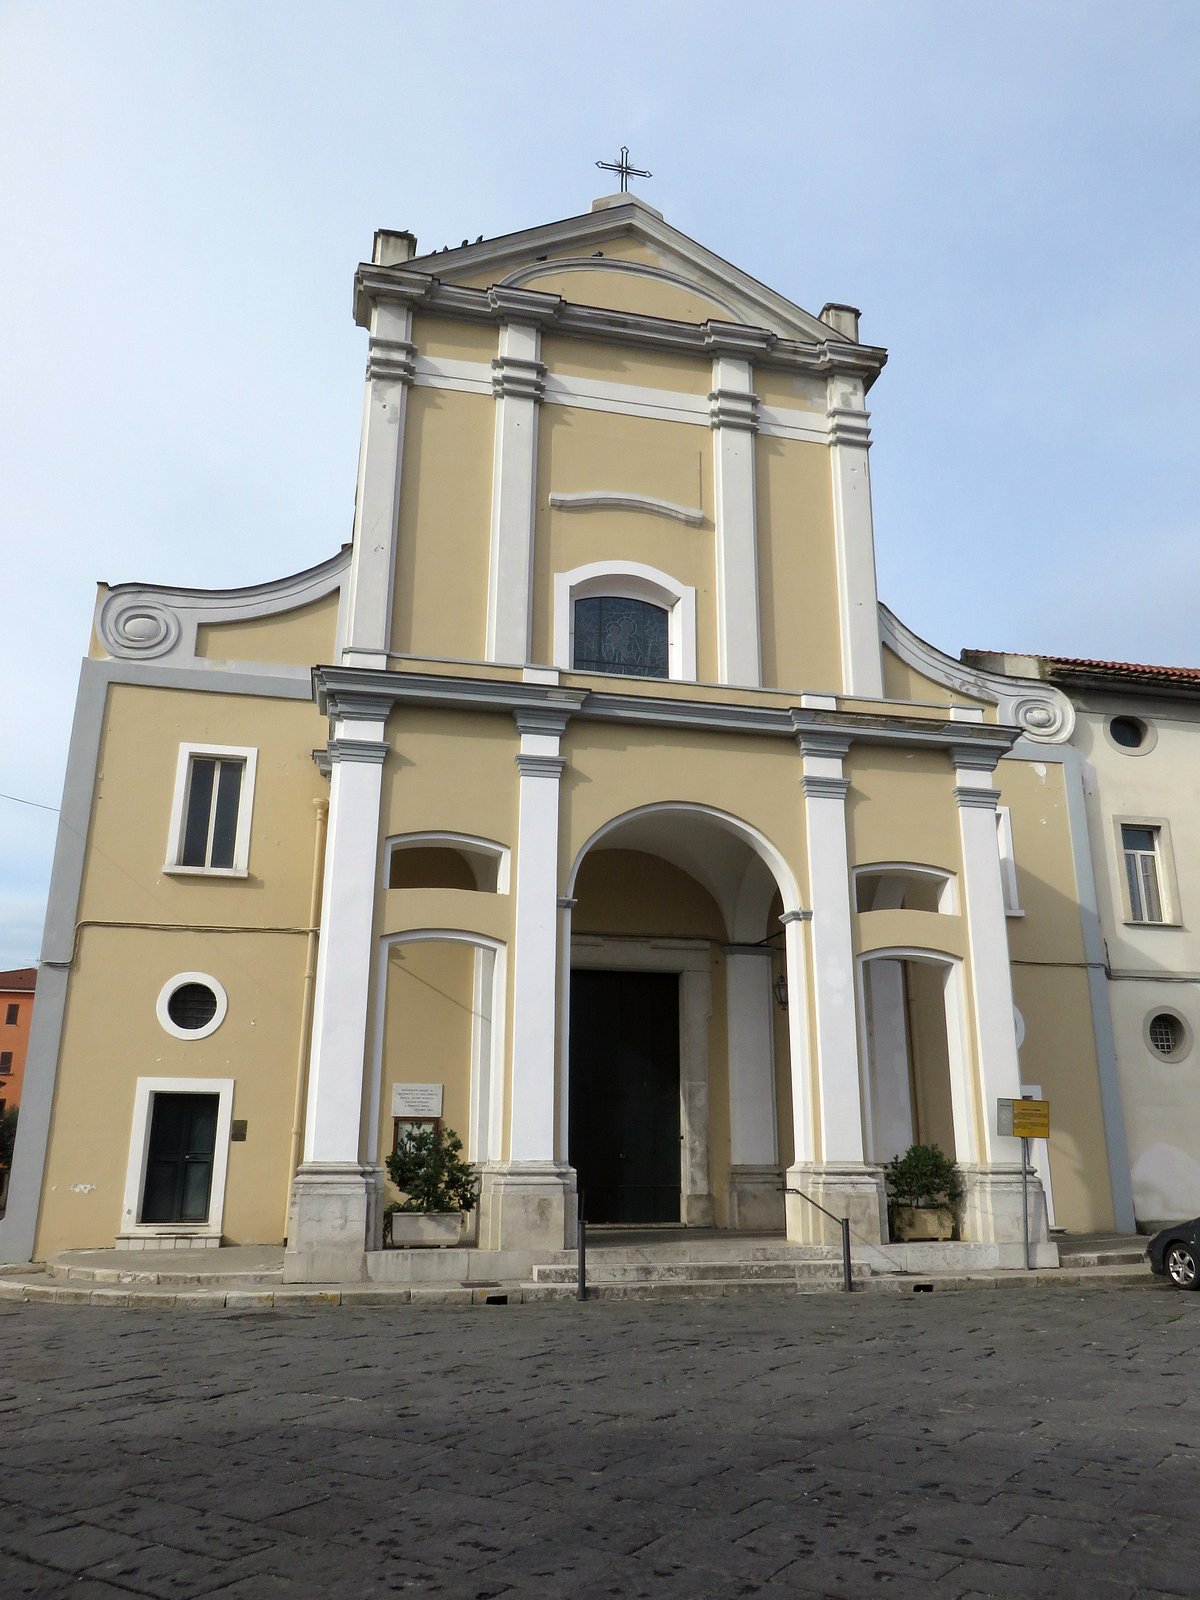 THE 15 BEST Things to Do in Capua - 2022 (with Photos) - Tripadvisor